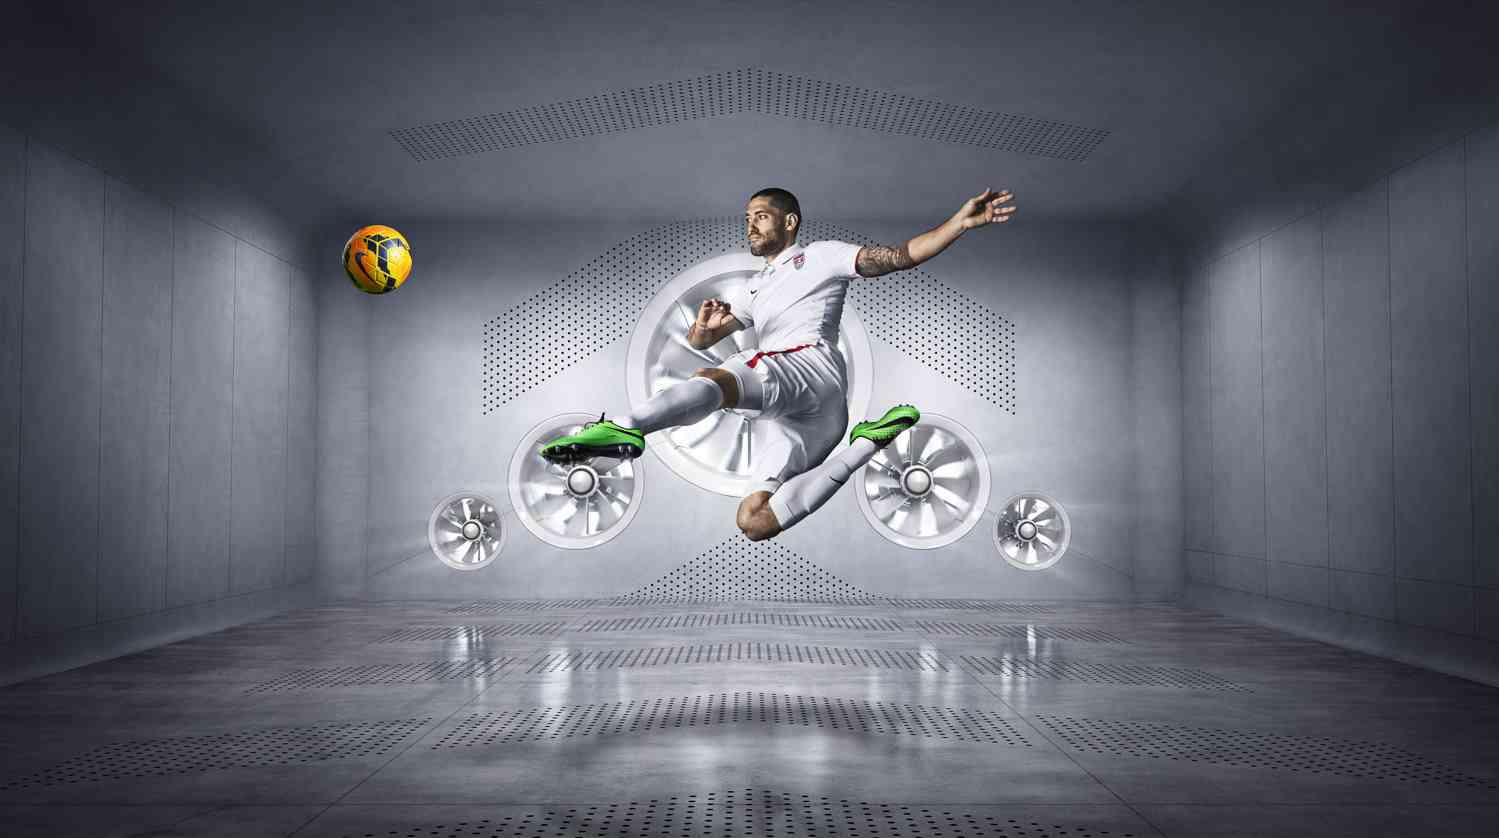 Warwick Saint renowned advertising photographer led worldwide Nike World Cup Campaigns.